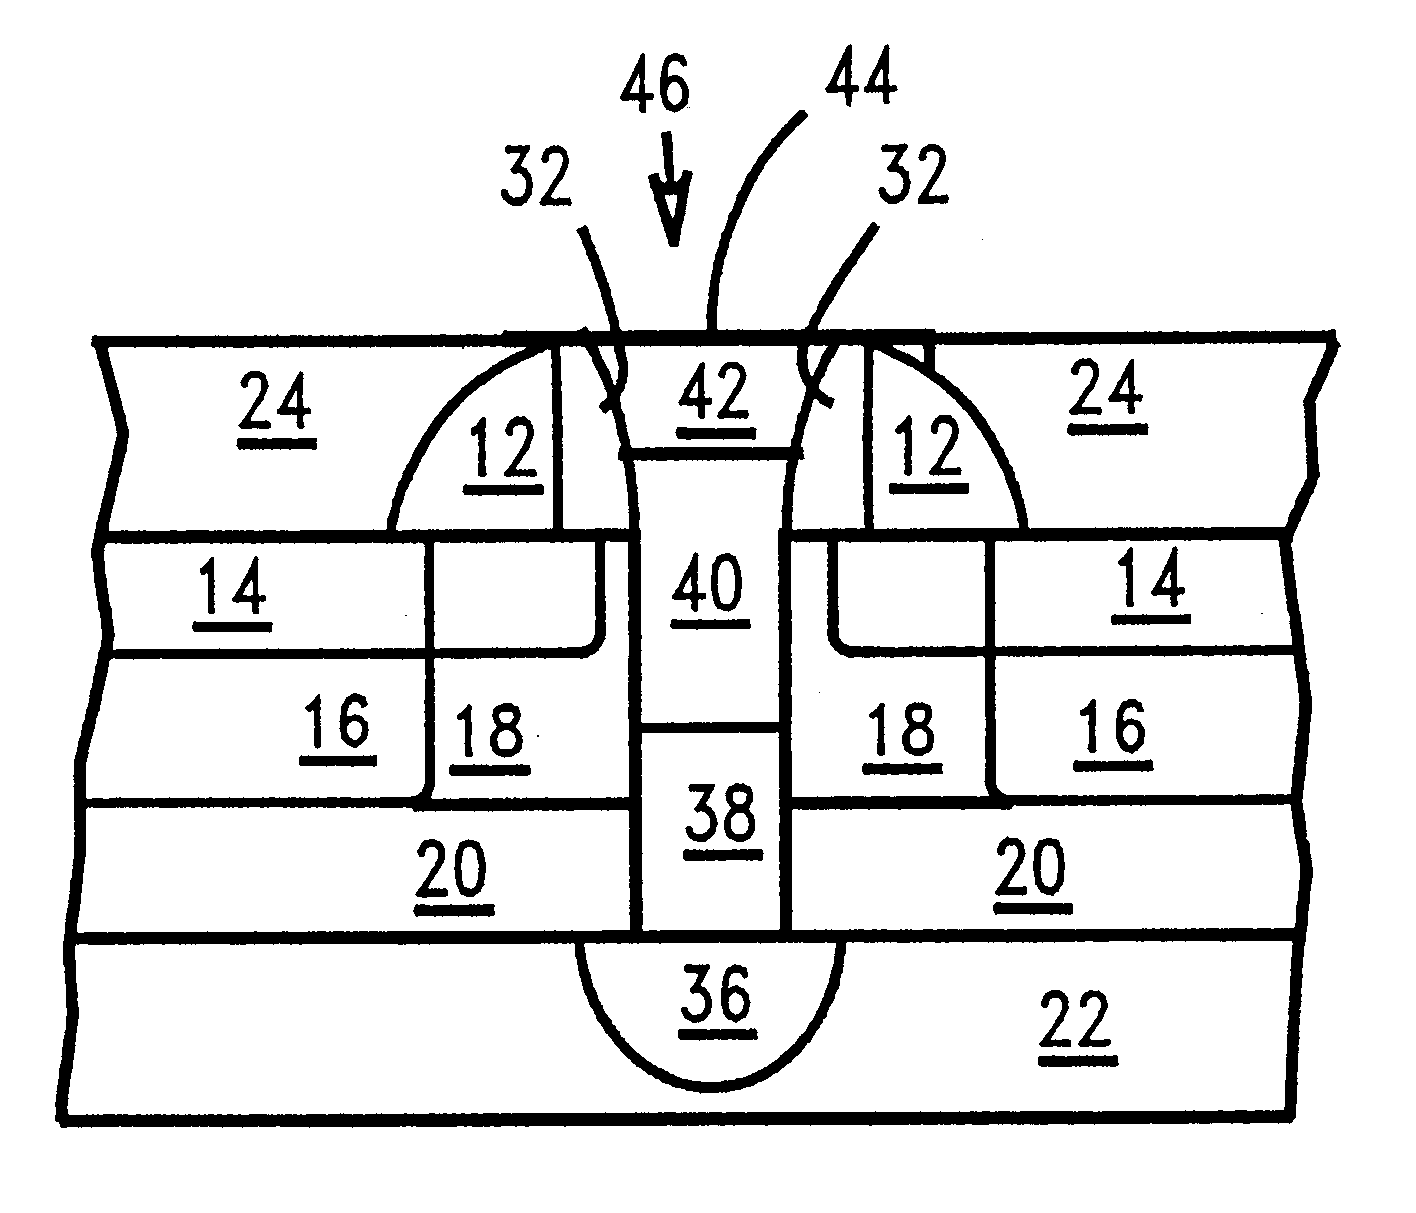 SOI CMOS body contact through gate, self-aligned to source- drain diffusions